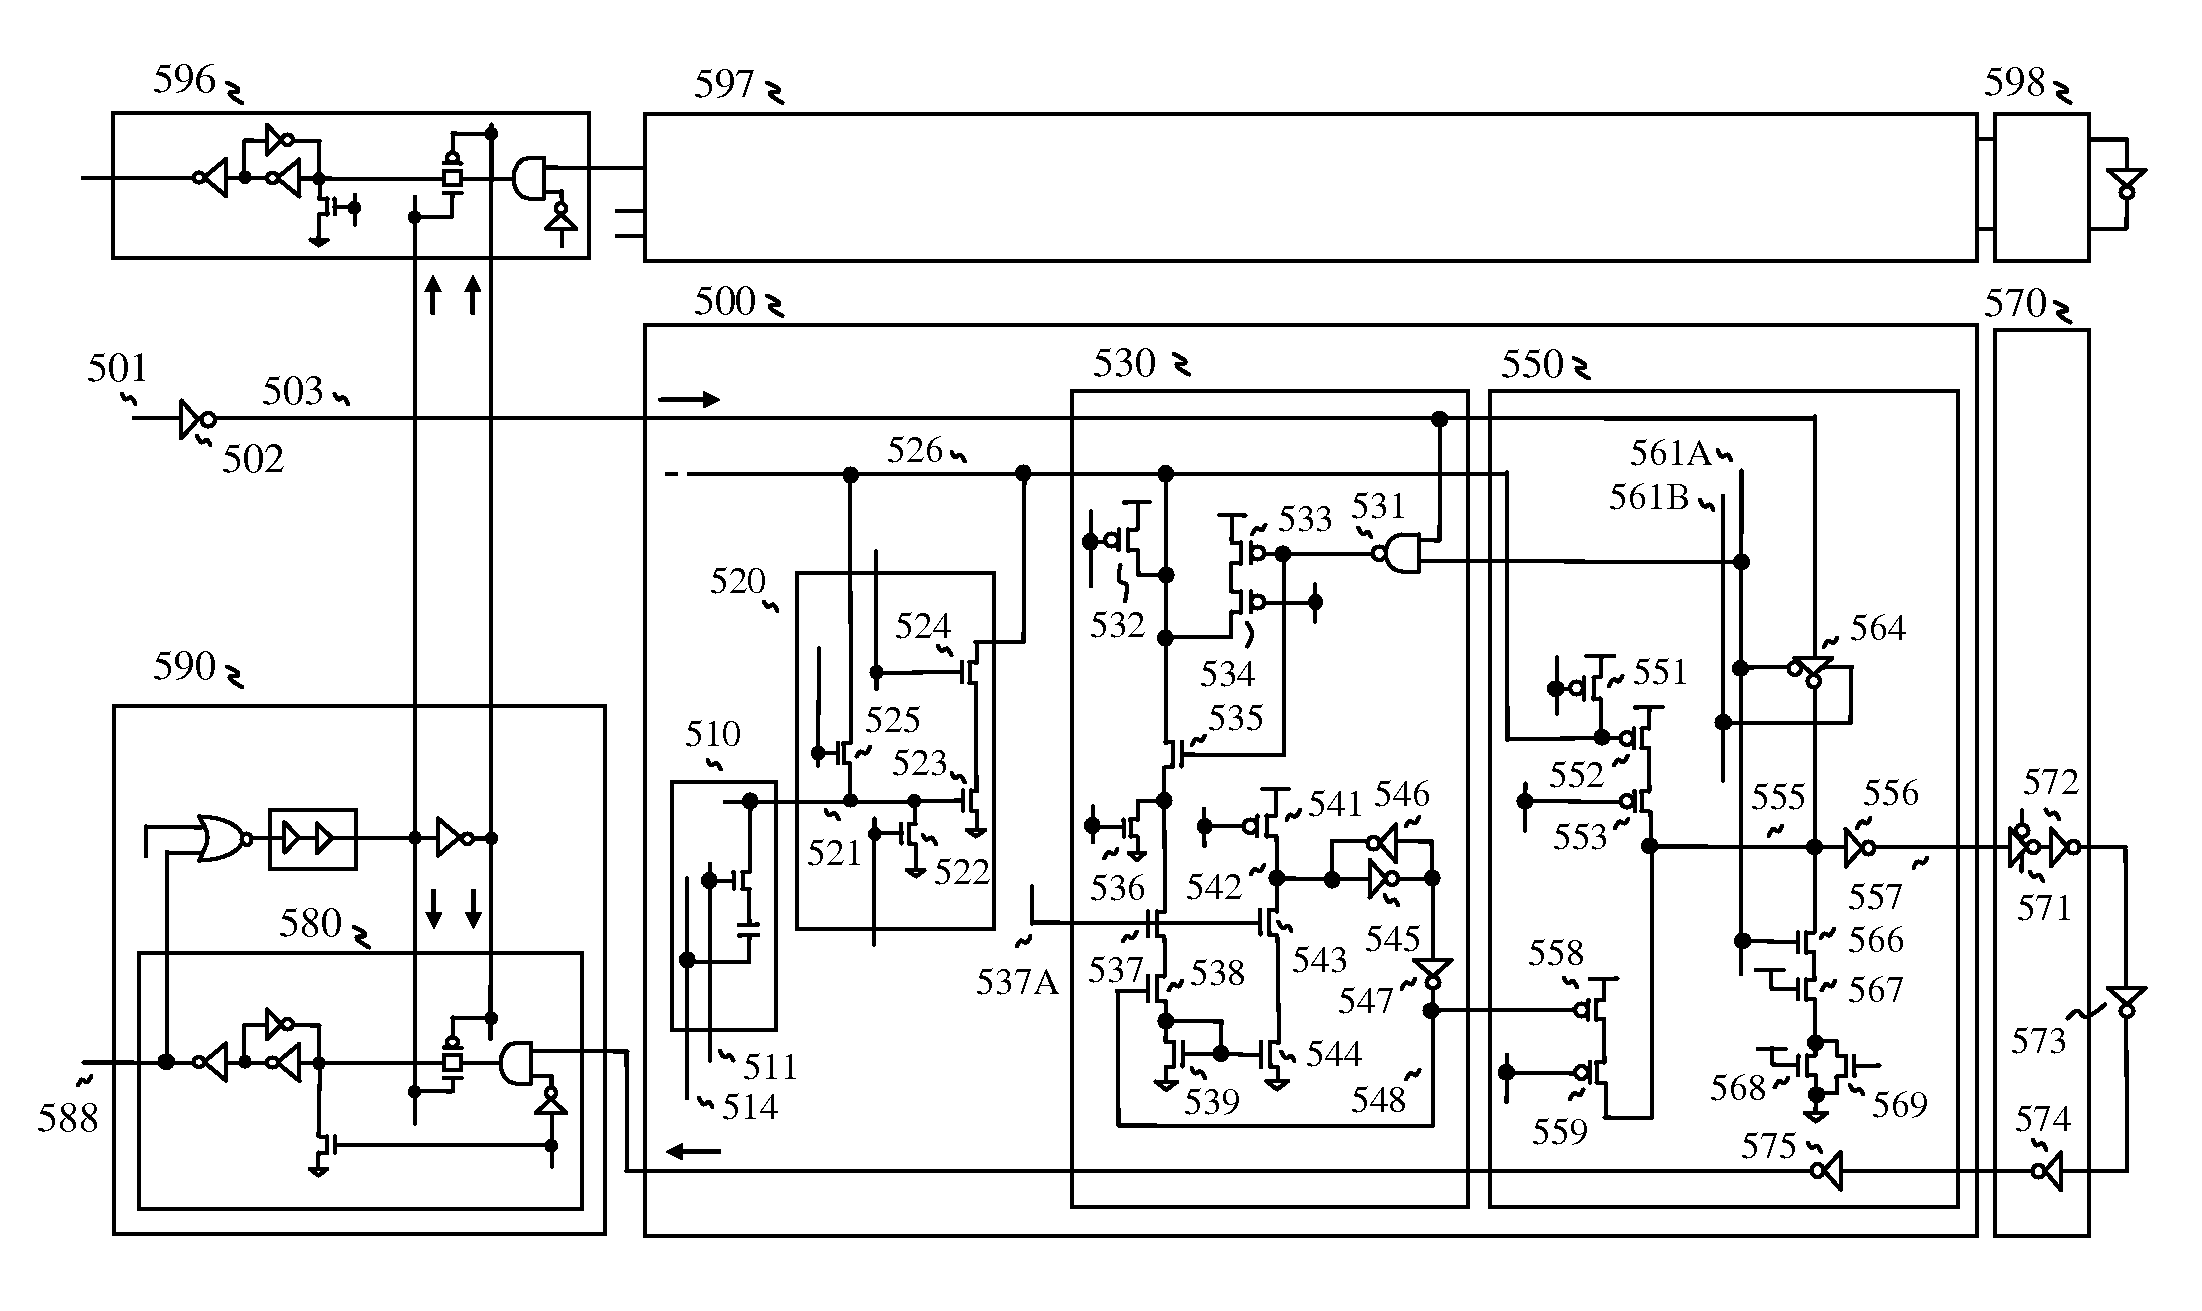 Mask ROM with light bit line architecture